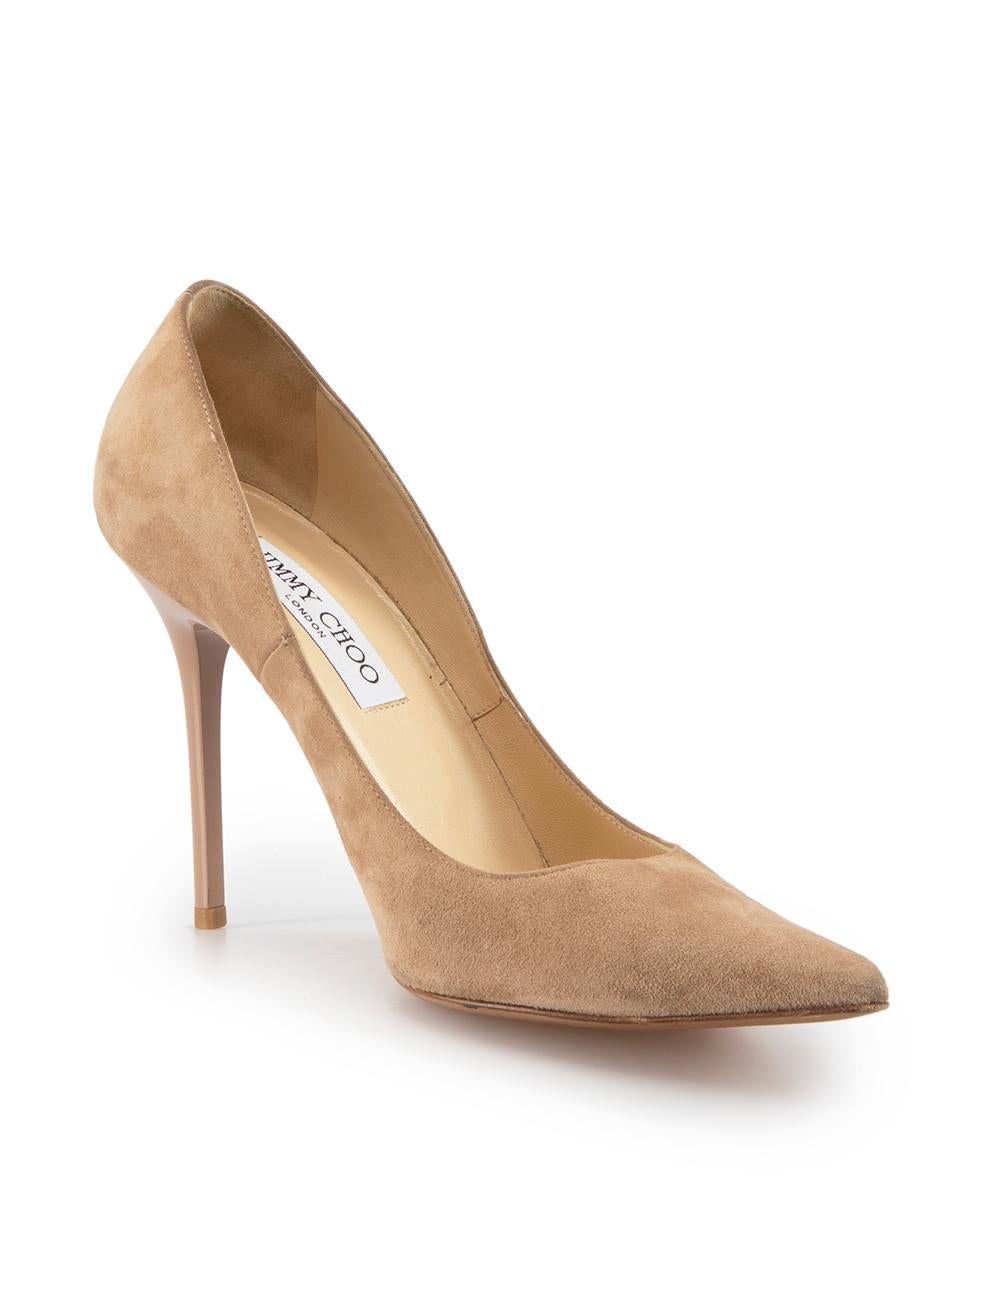 CONDITION is Good. Minor wear to heels is evident. Light wear to uppers with very light creasing seen over the toes, a number of discoloured marks at the heels and abrasion of surface coating on the heel near top-pieces. Soles are mildly scuffed on